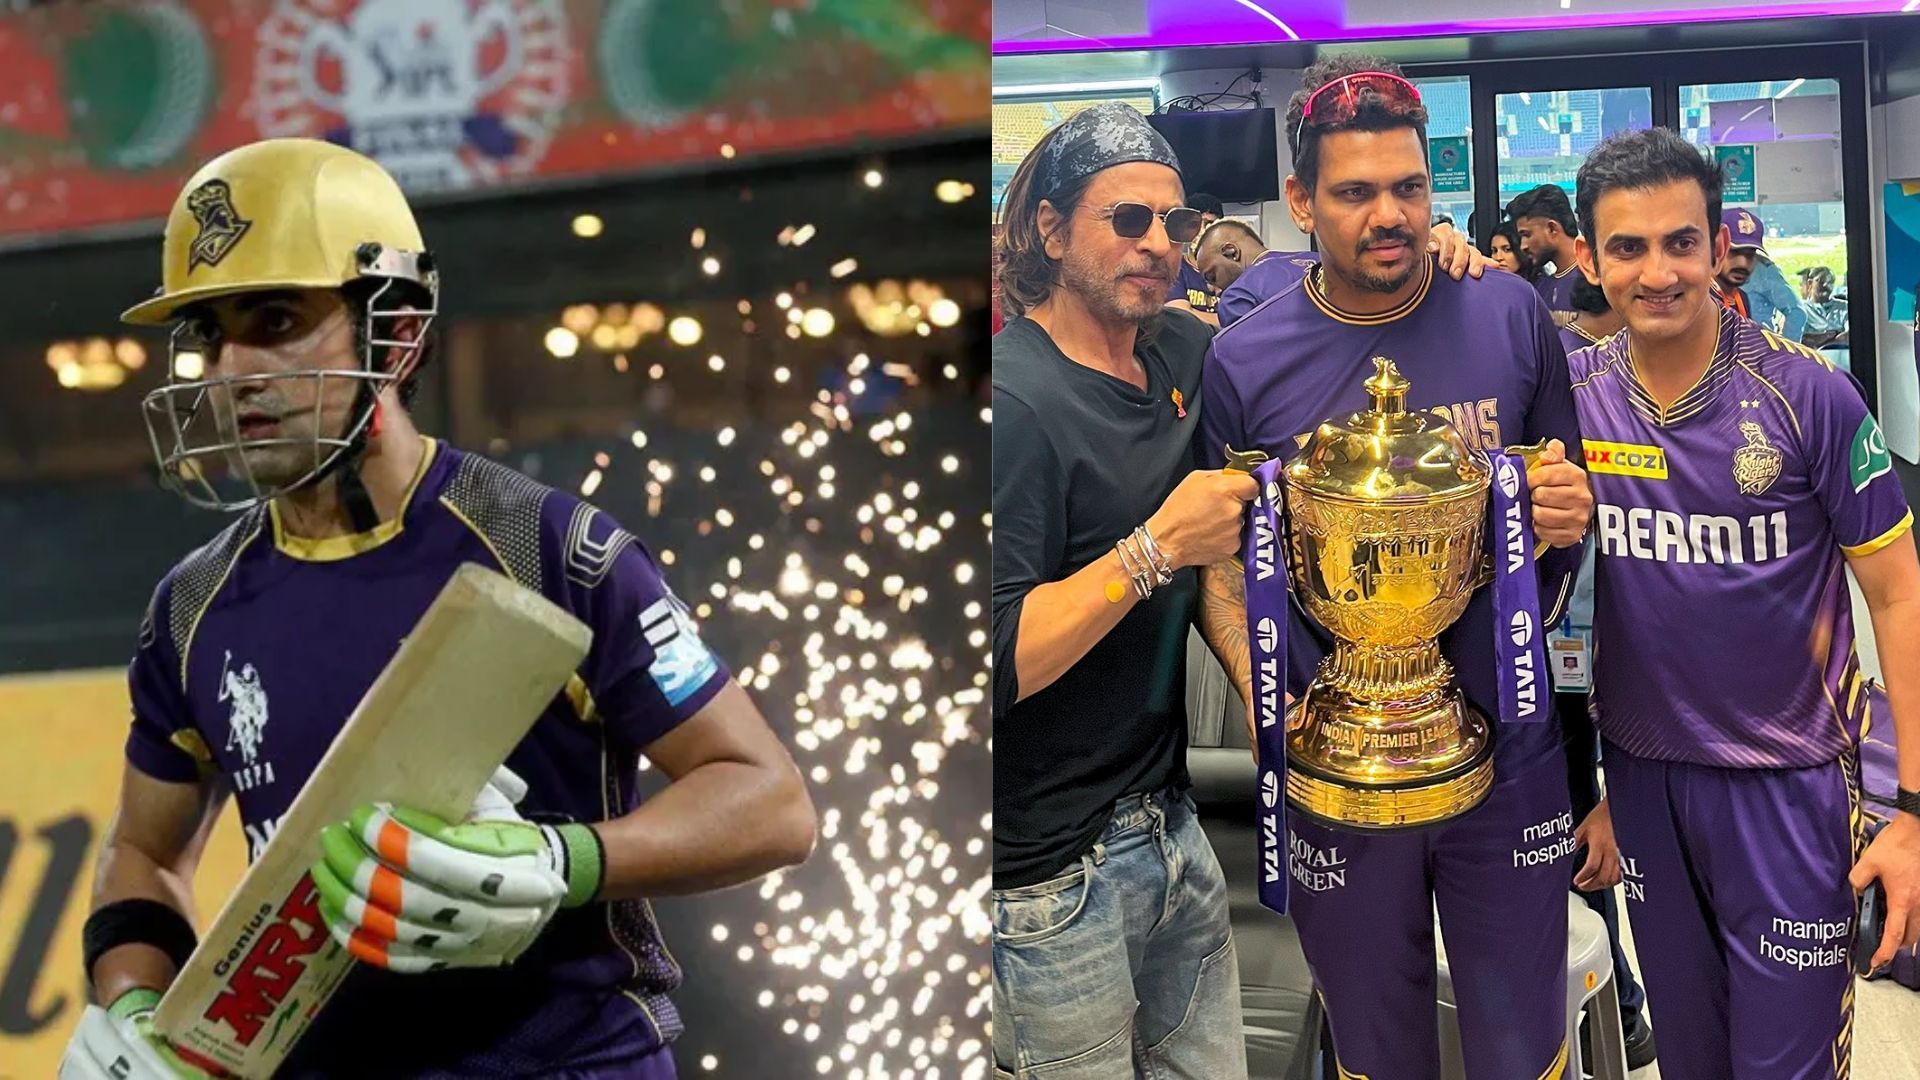 Gautam Gahmbir captained KKR to title wins in IPL 2012 and 2014 before winning third title with the team in IPL 2024 as mentor